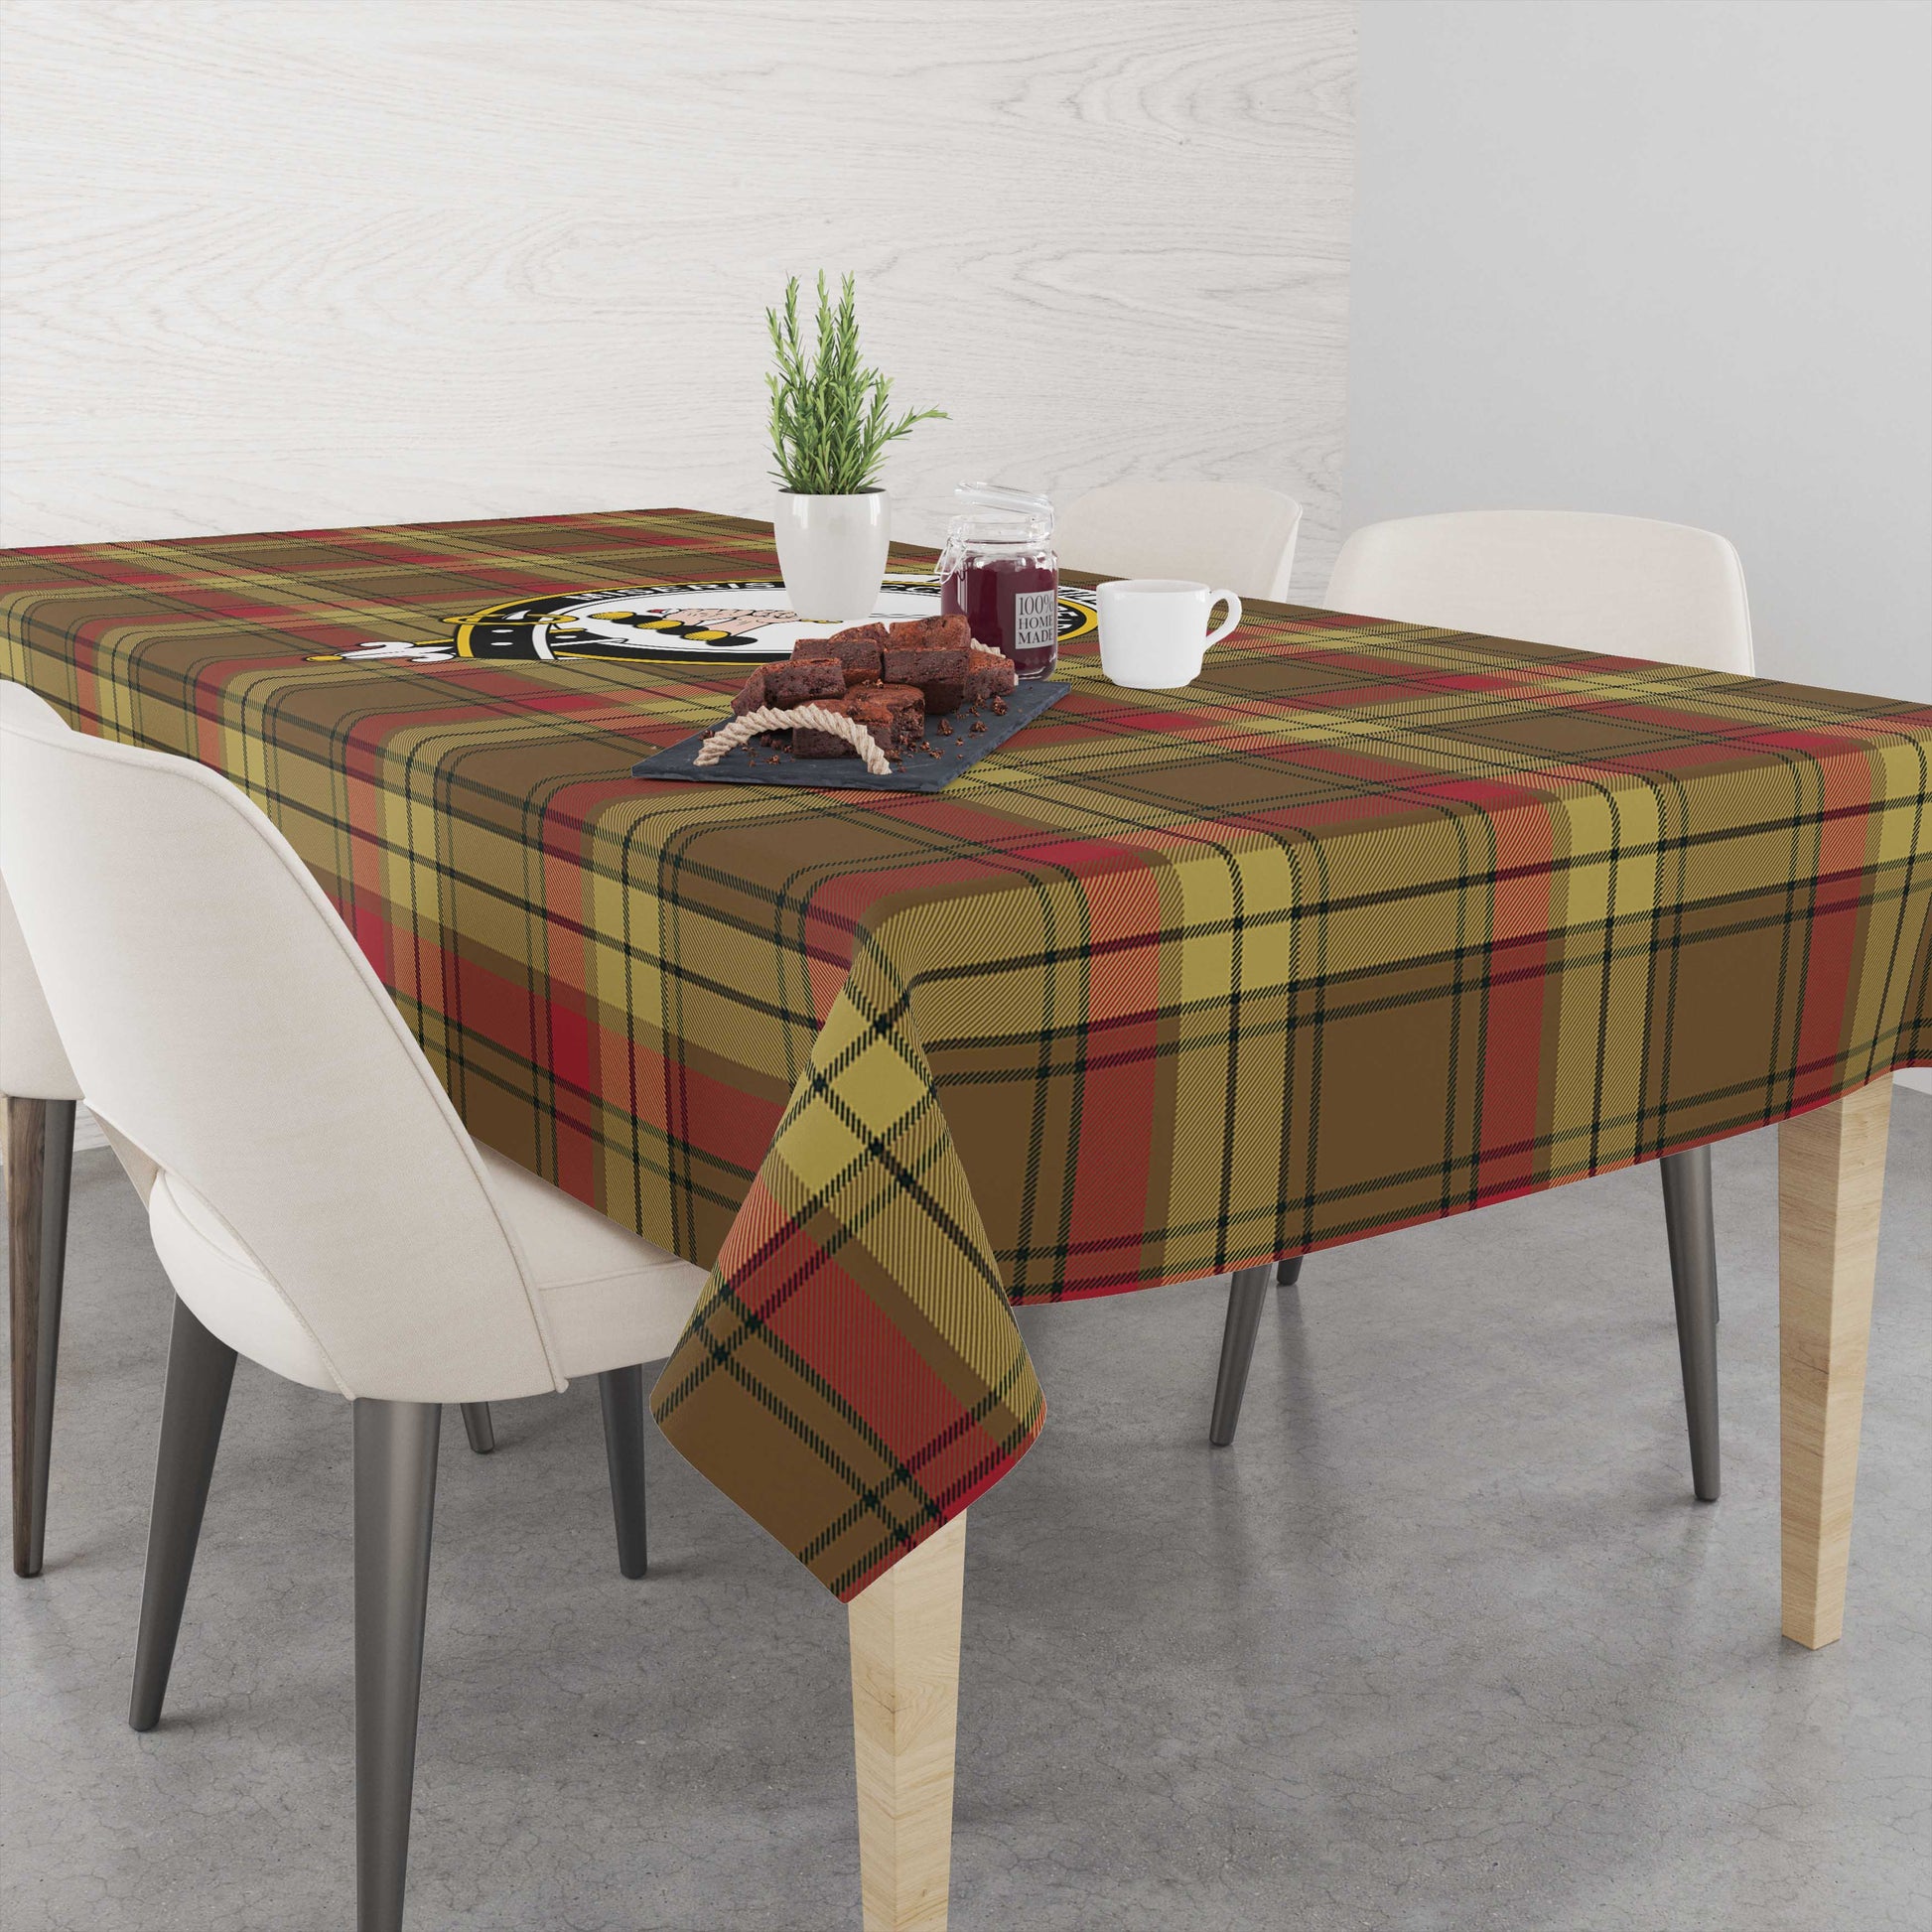 macmillan-old-weathered-tatan-tablecloth-with-family-crest